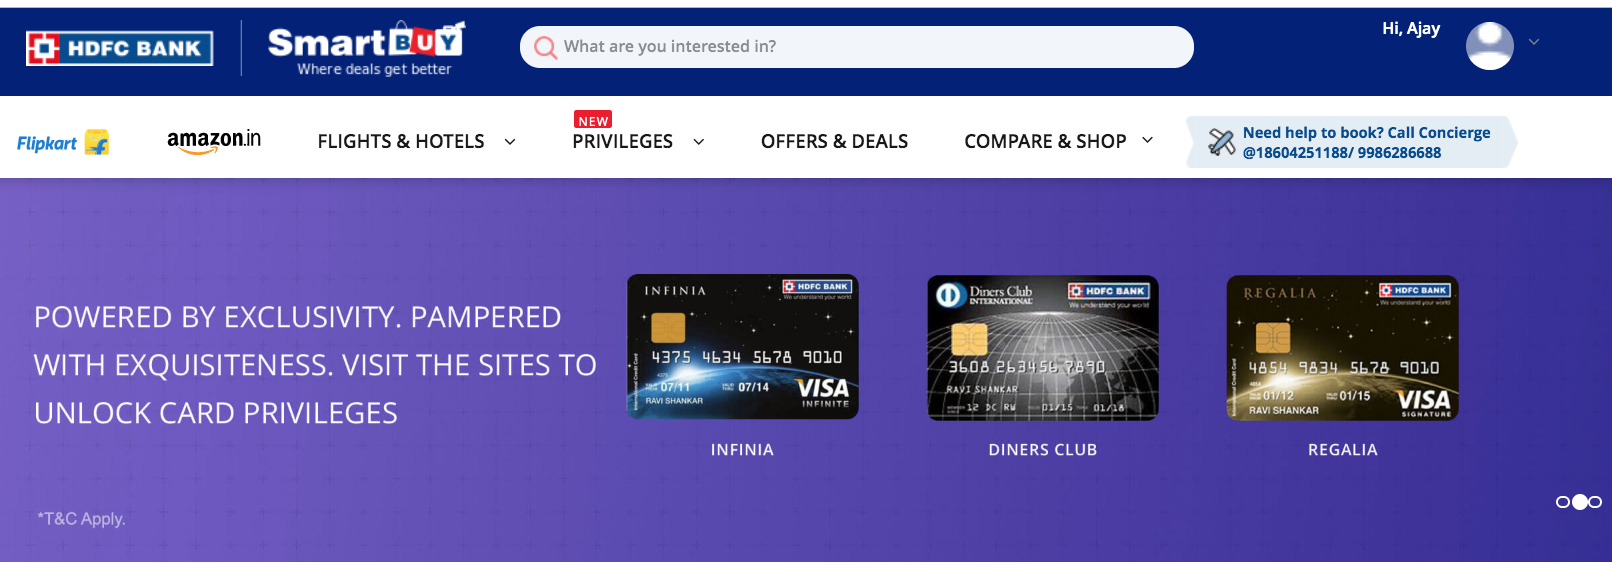 HDFC Bank Credit Card points can be redeemed for flights by many more